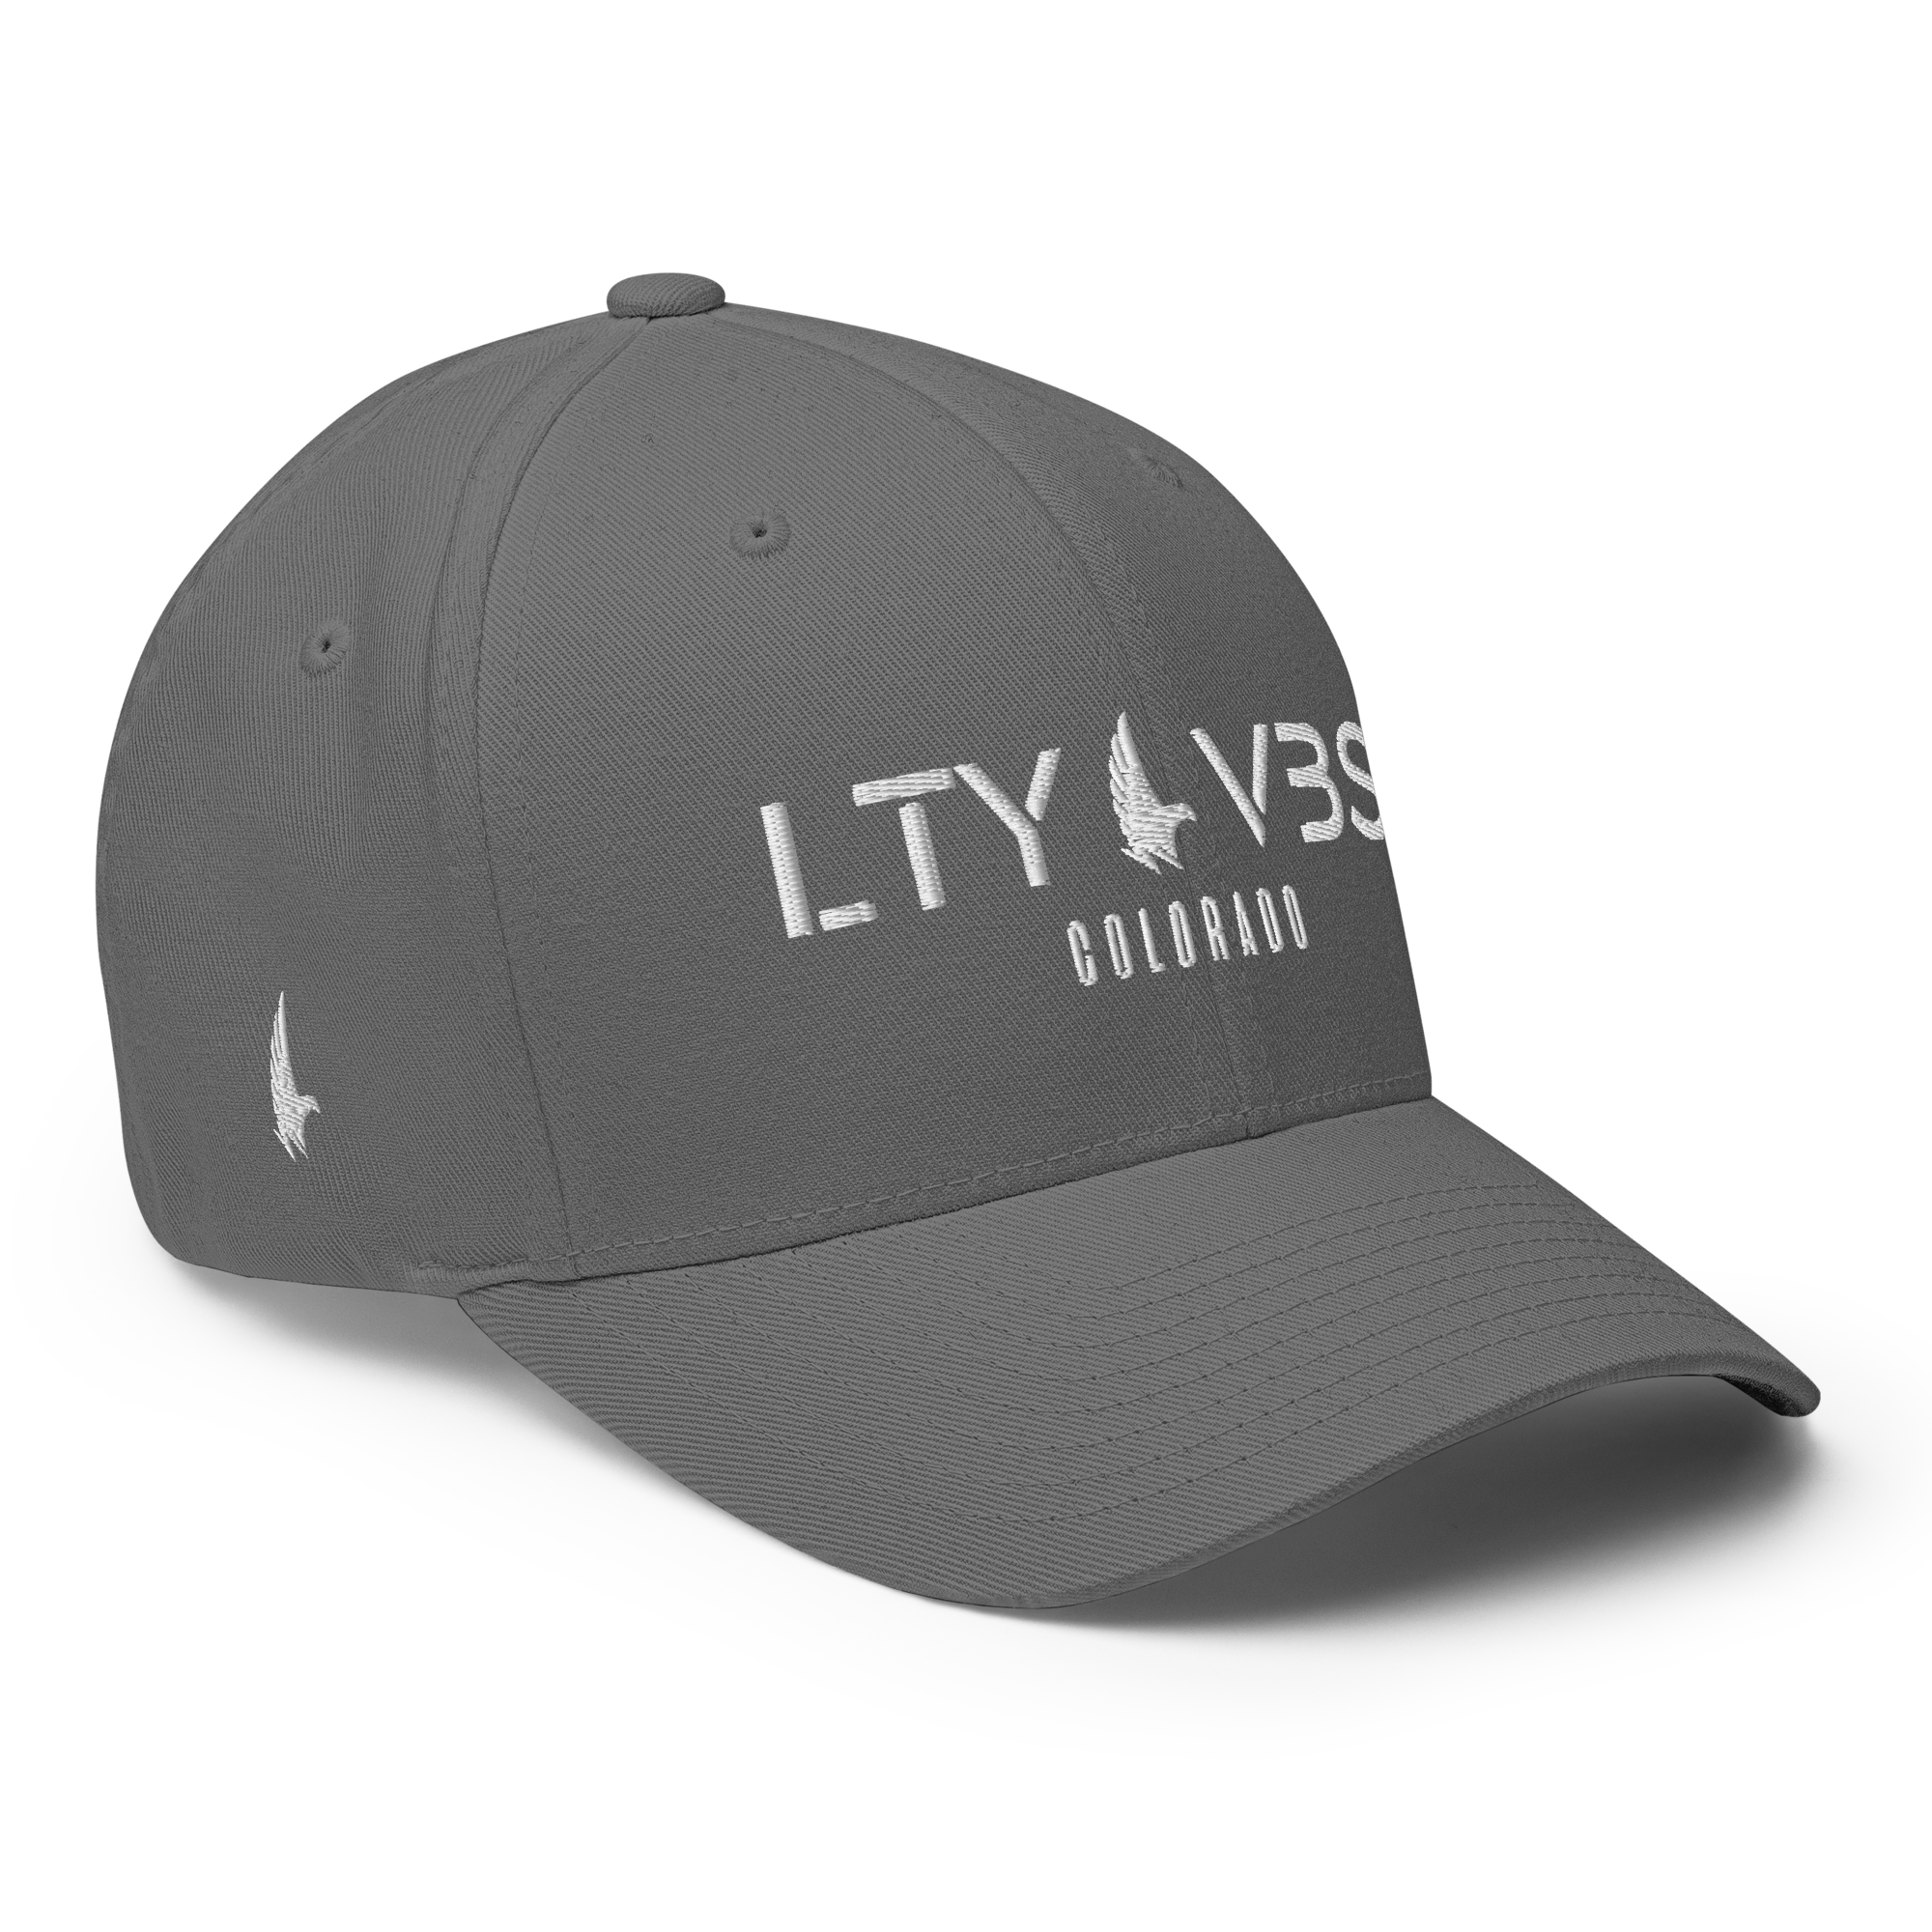 Loyalty Era Colorado Fitted Hat Gray / White Fitted - Loyalty Vibes